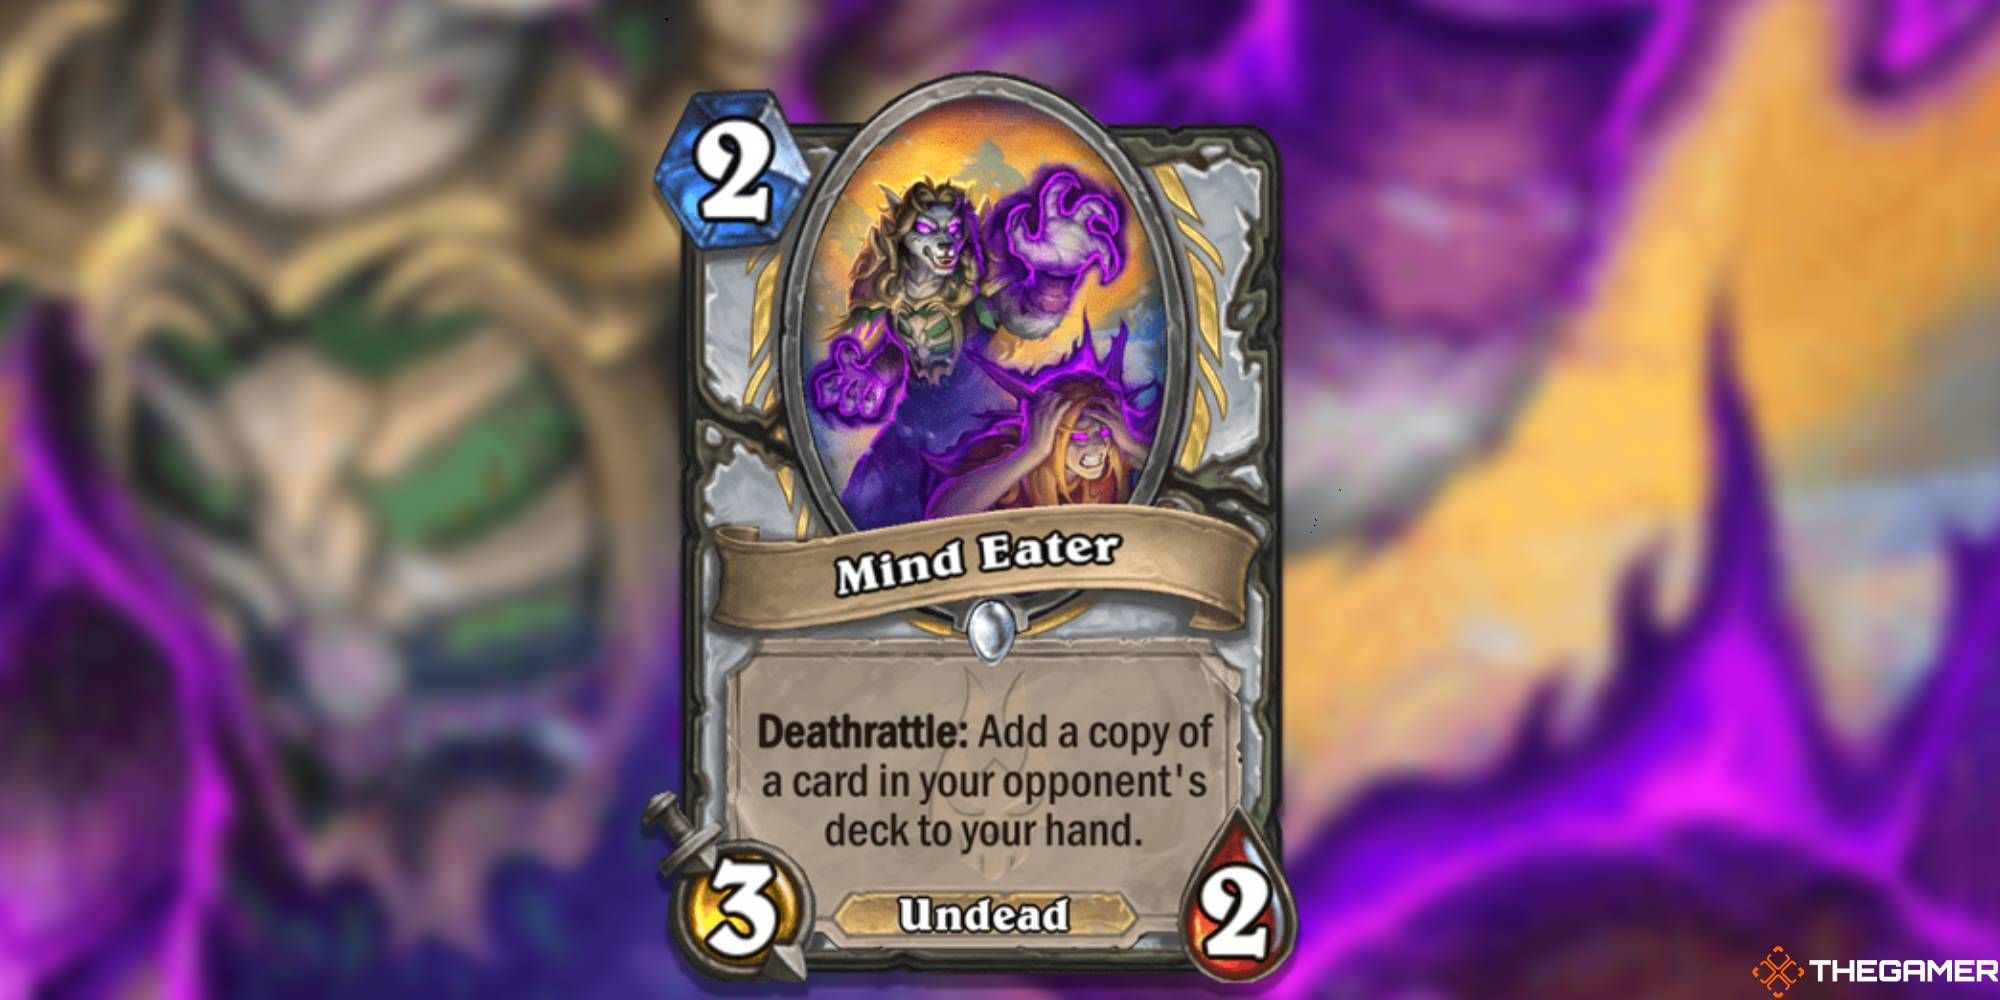 Mind Eater Hearthstone March of the Lich King